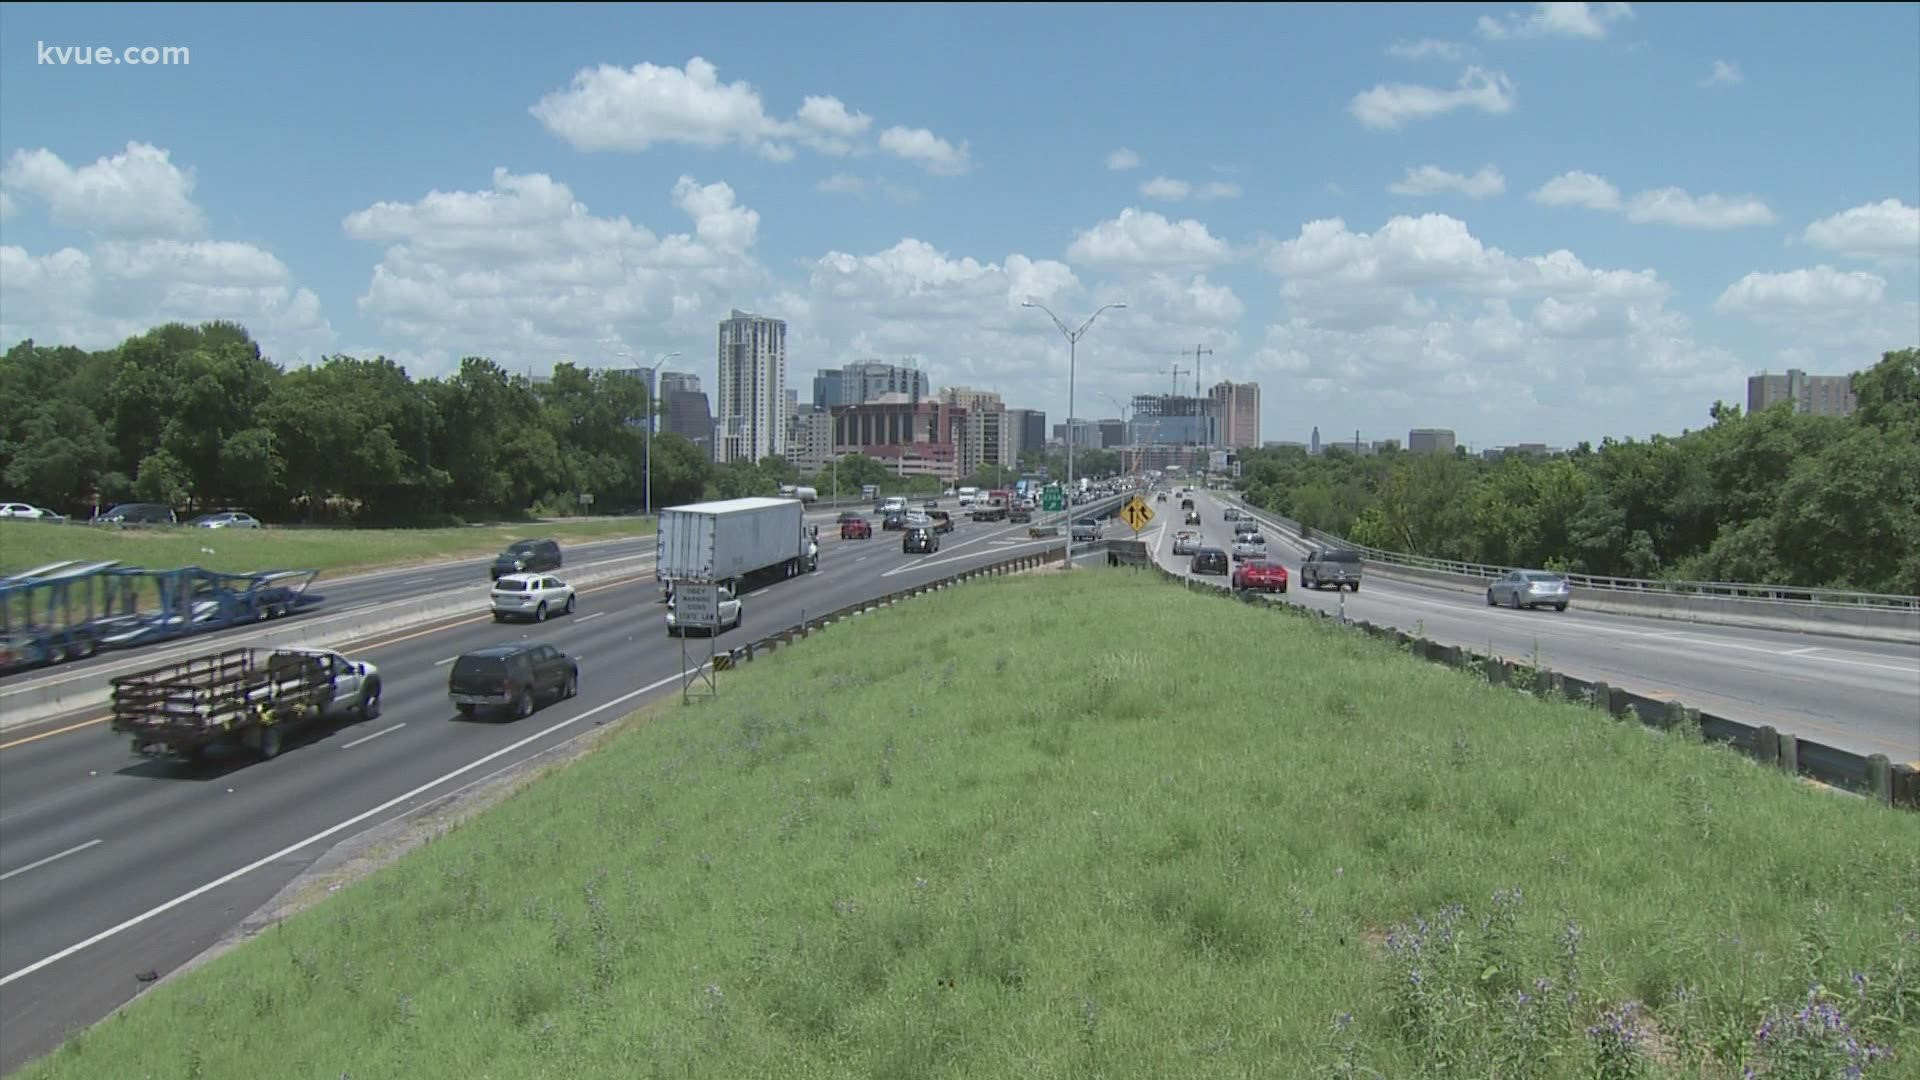 The transportation department said Austin has seen a 25% increase in traffic fatalities, higher than the 16% national average. Texas has seen a 17% jump.